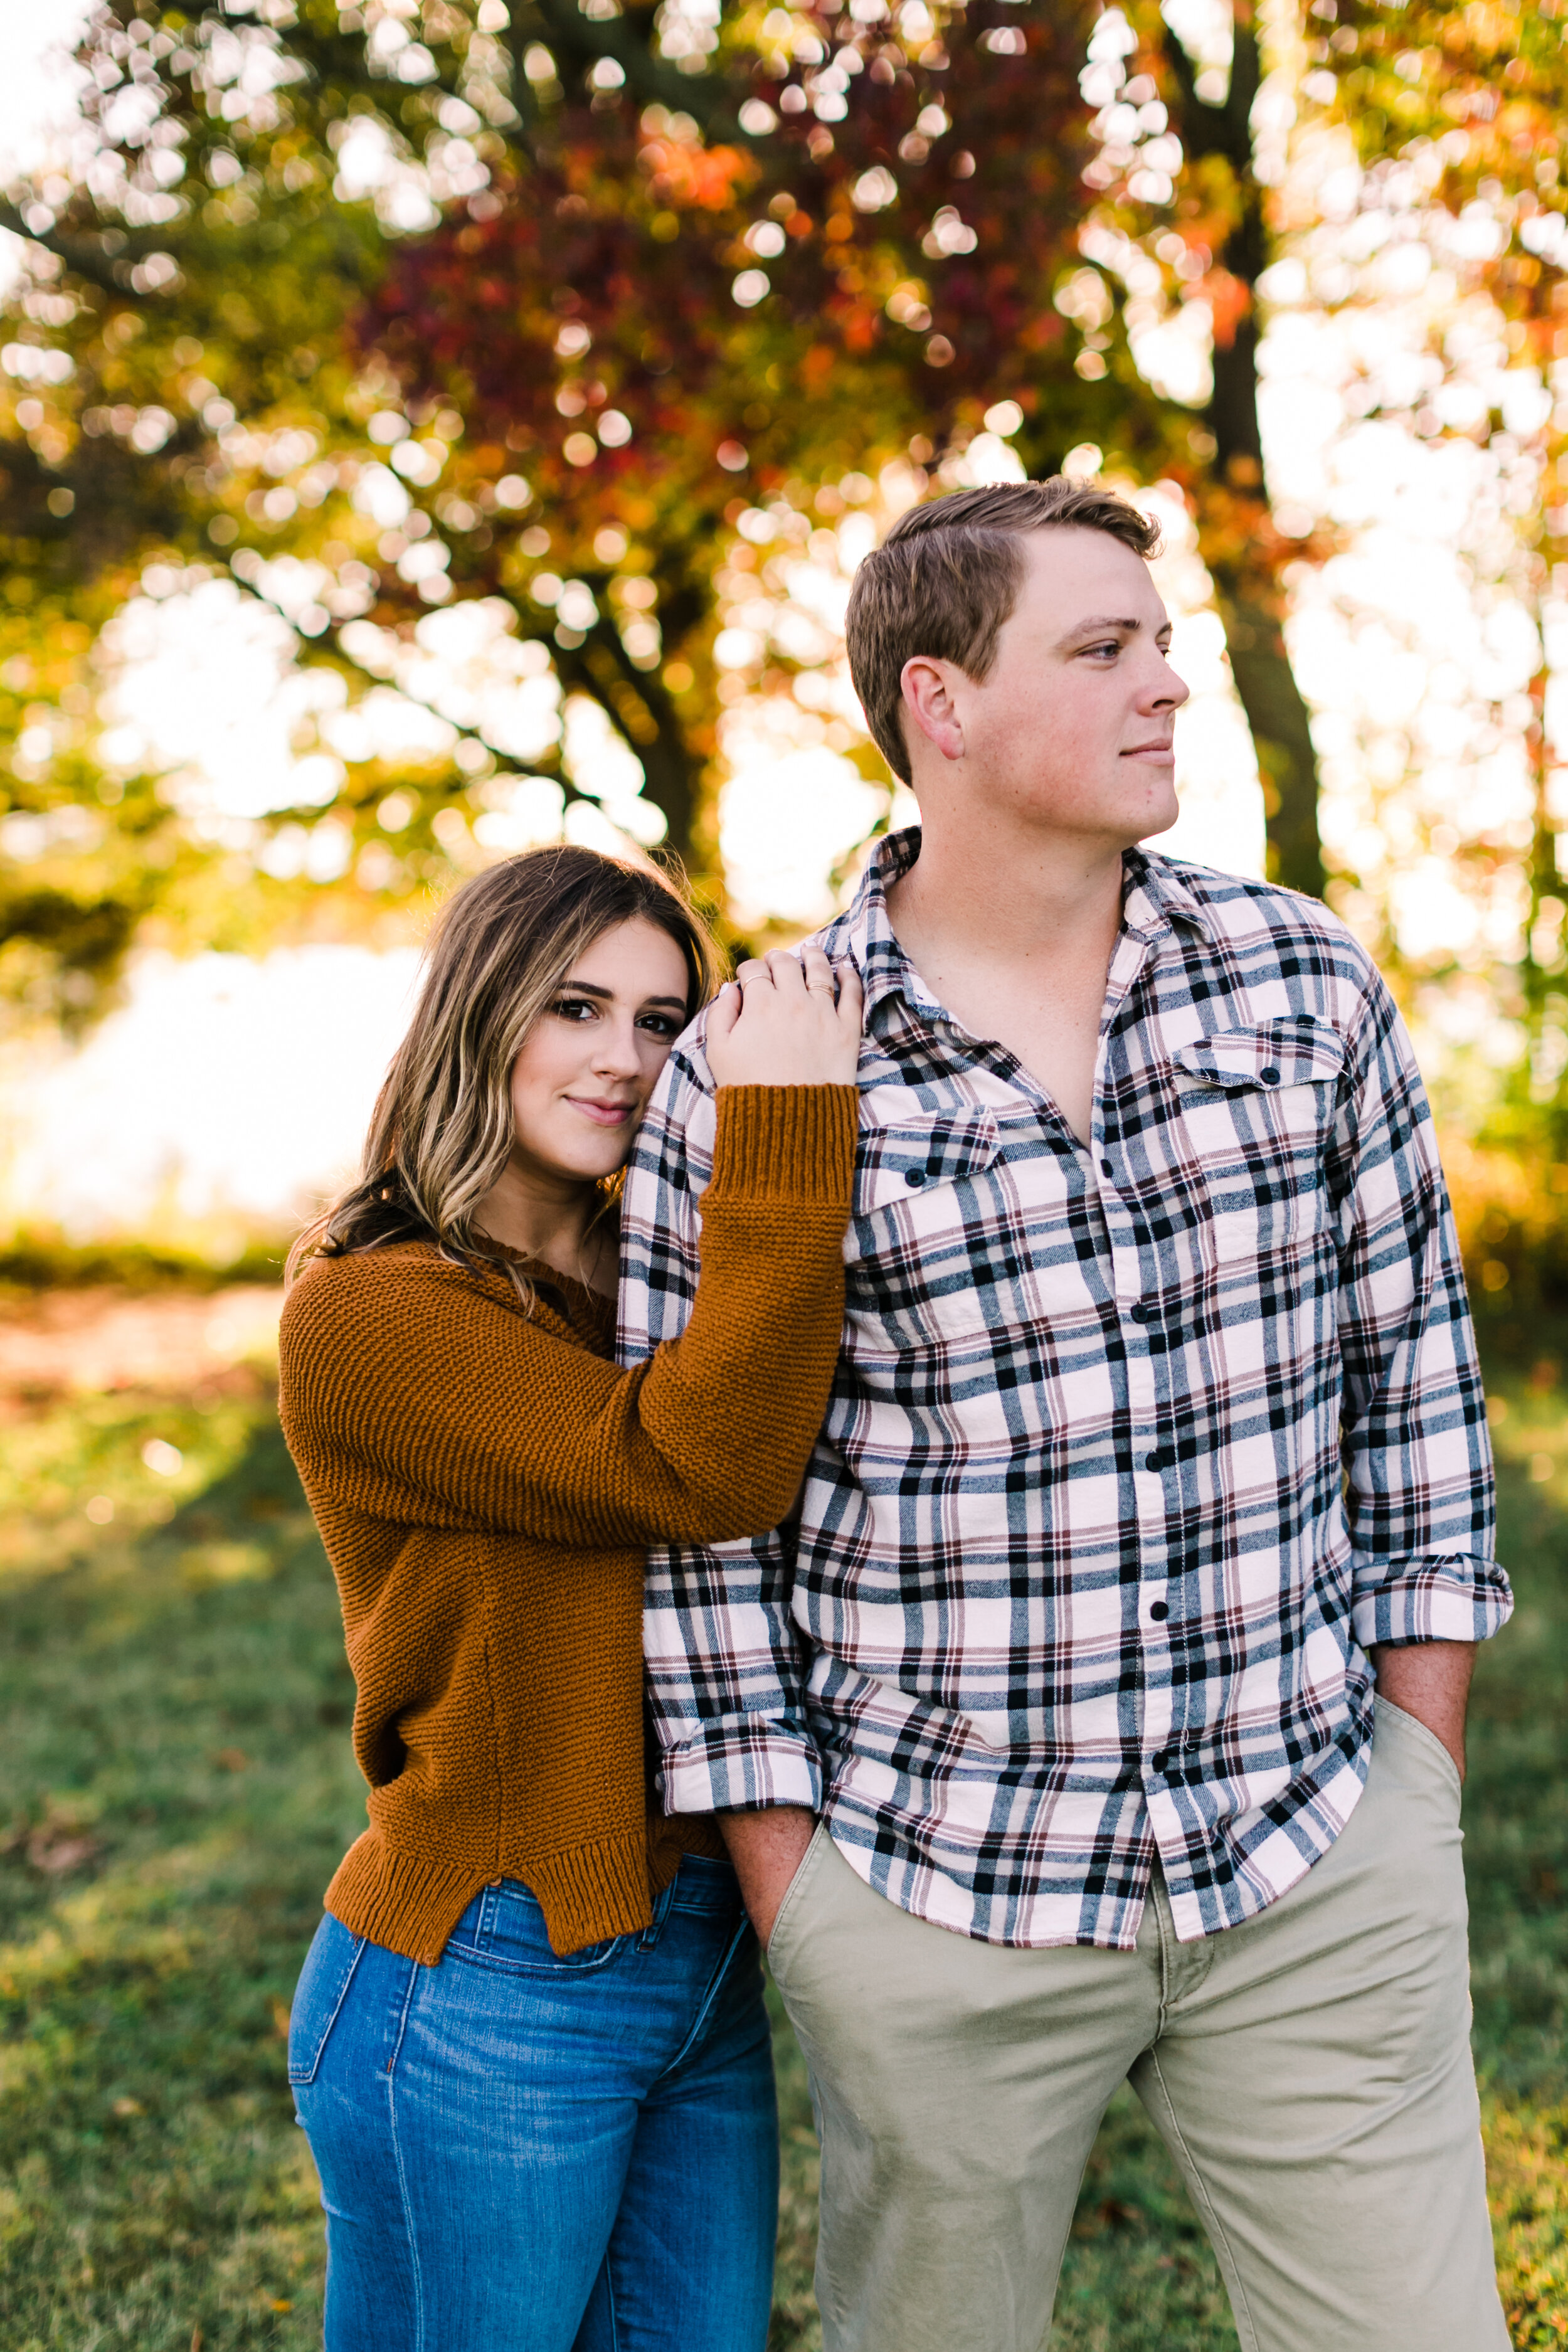 Tennessee+Fall+Engagement+Photos+Puppy (41 of 63).jpg